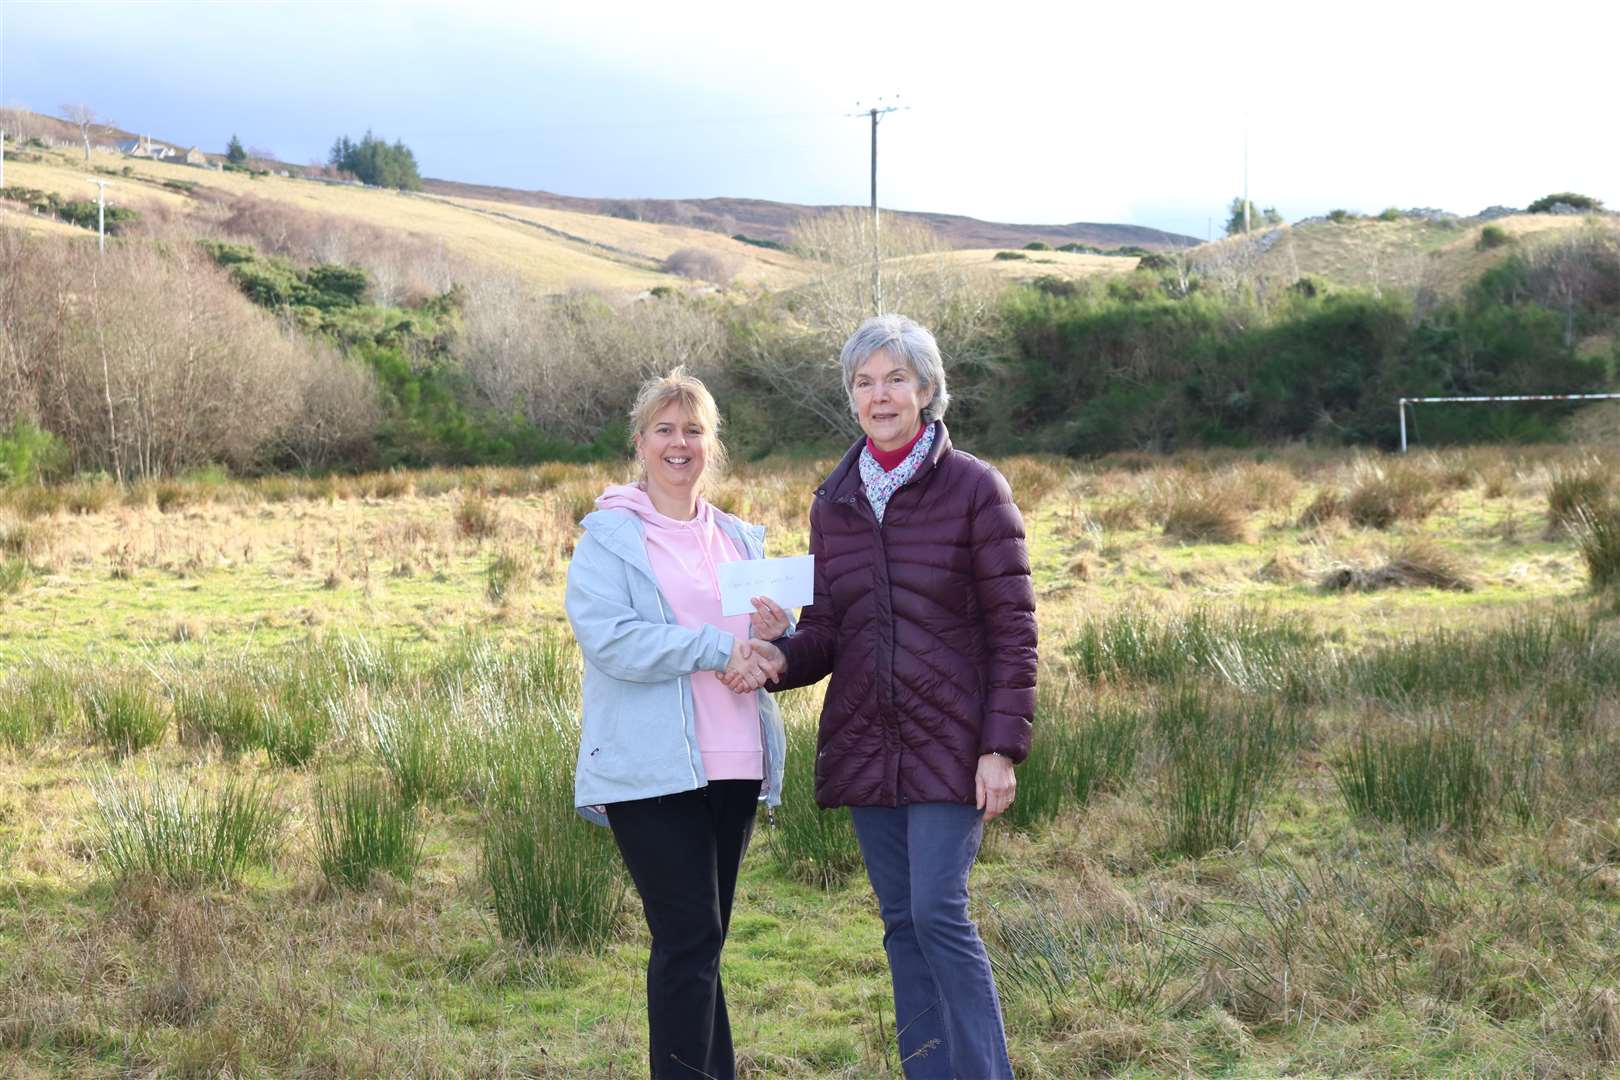 Sarah Fox receives a £1,000 donation towards the Tongue MUGA project from Karen Kelly of Melness Crofters Estate. Behind them is the football pitch where the MUGA will be built.